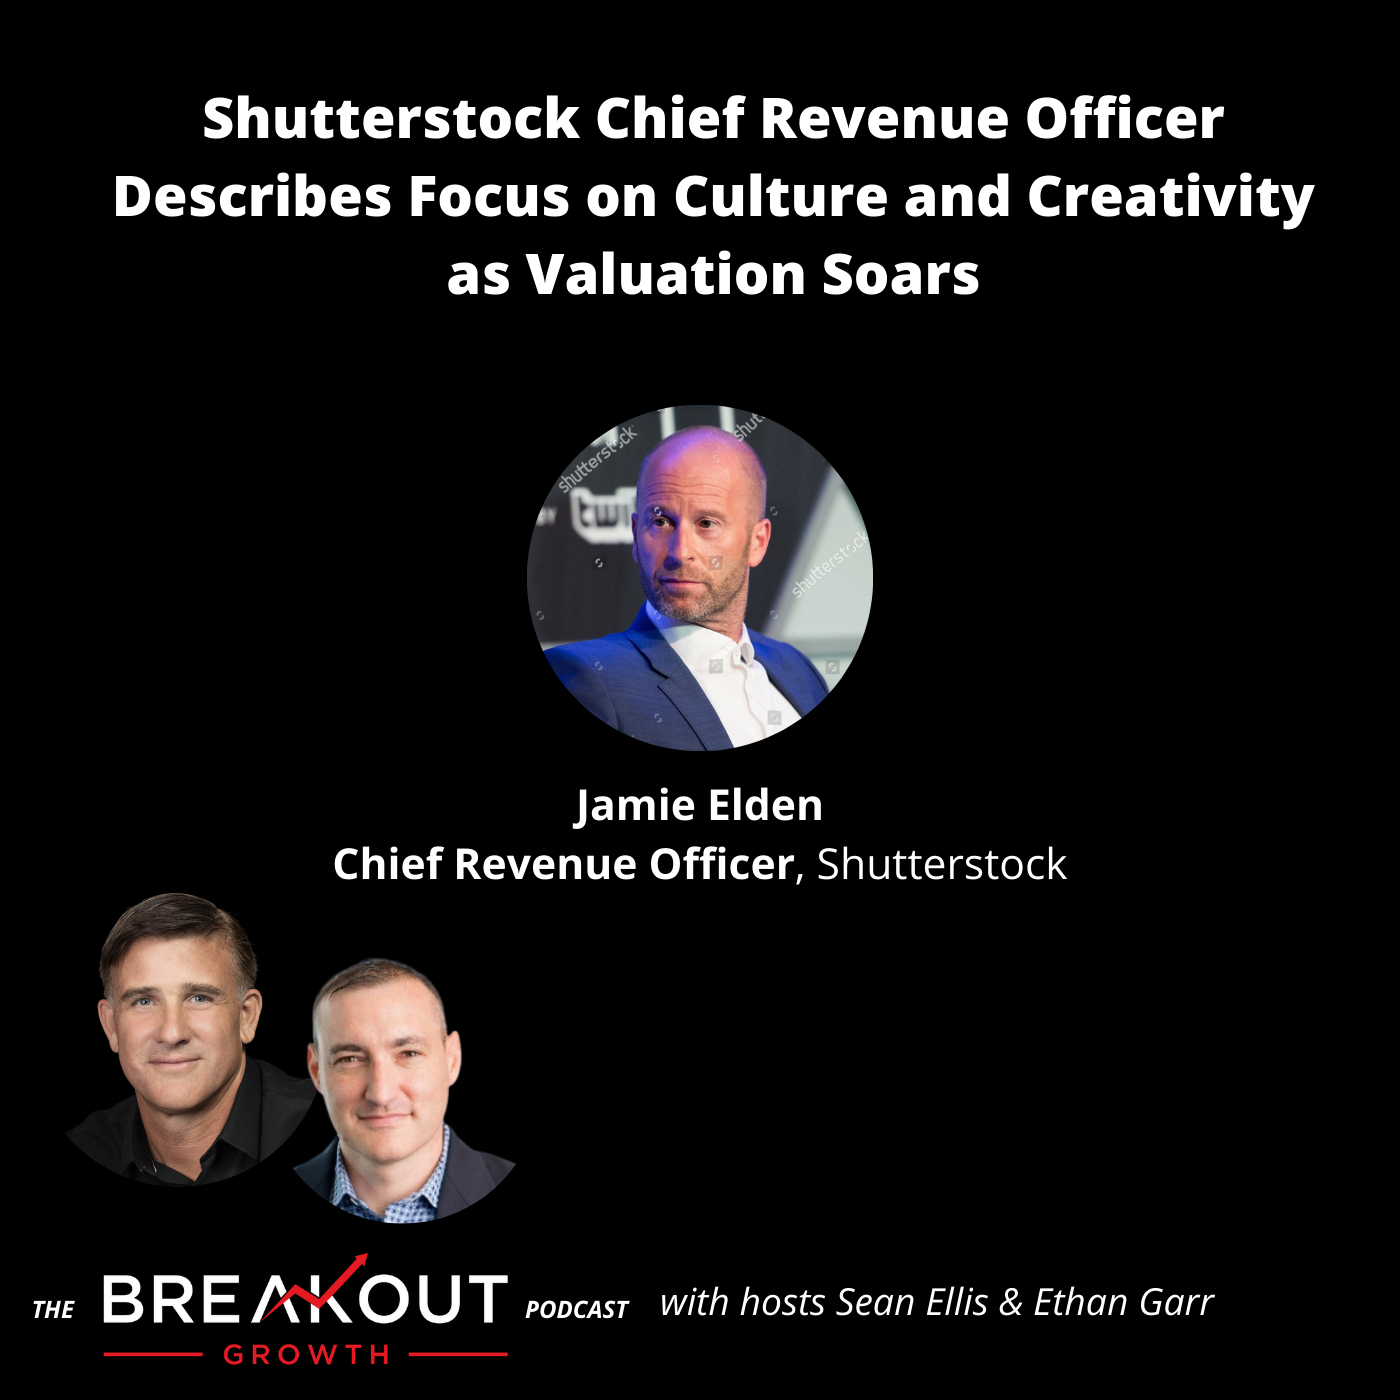 Shutterstock Chief Revenue Officer Explains Focus on Culture and Creativity as Valuation Soars